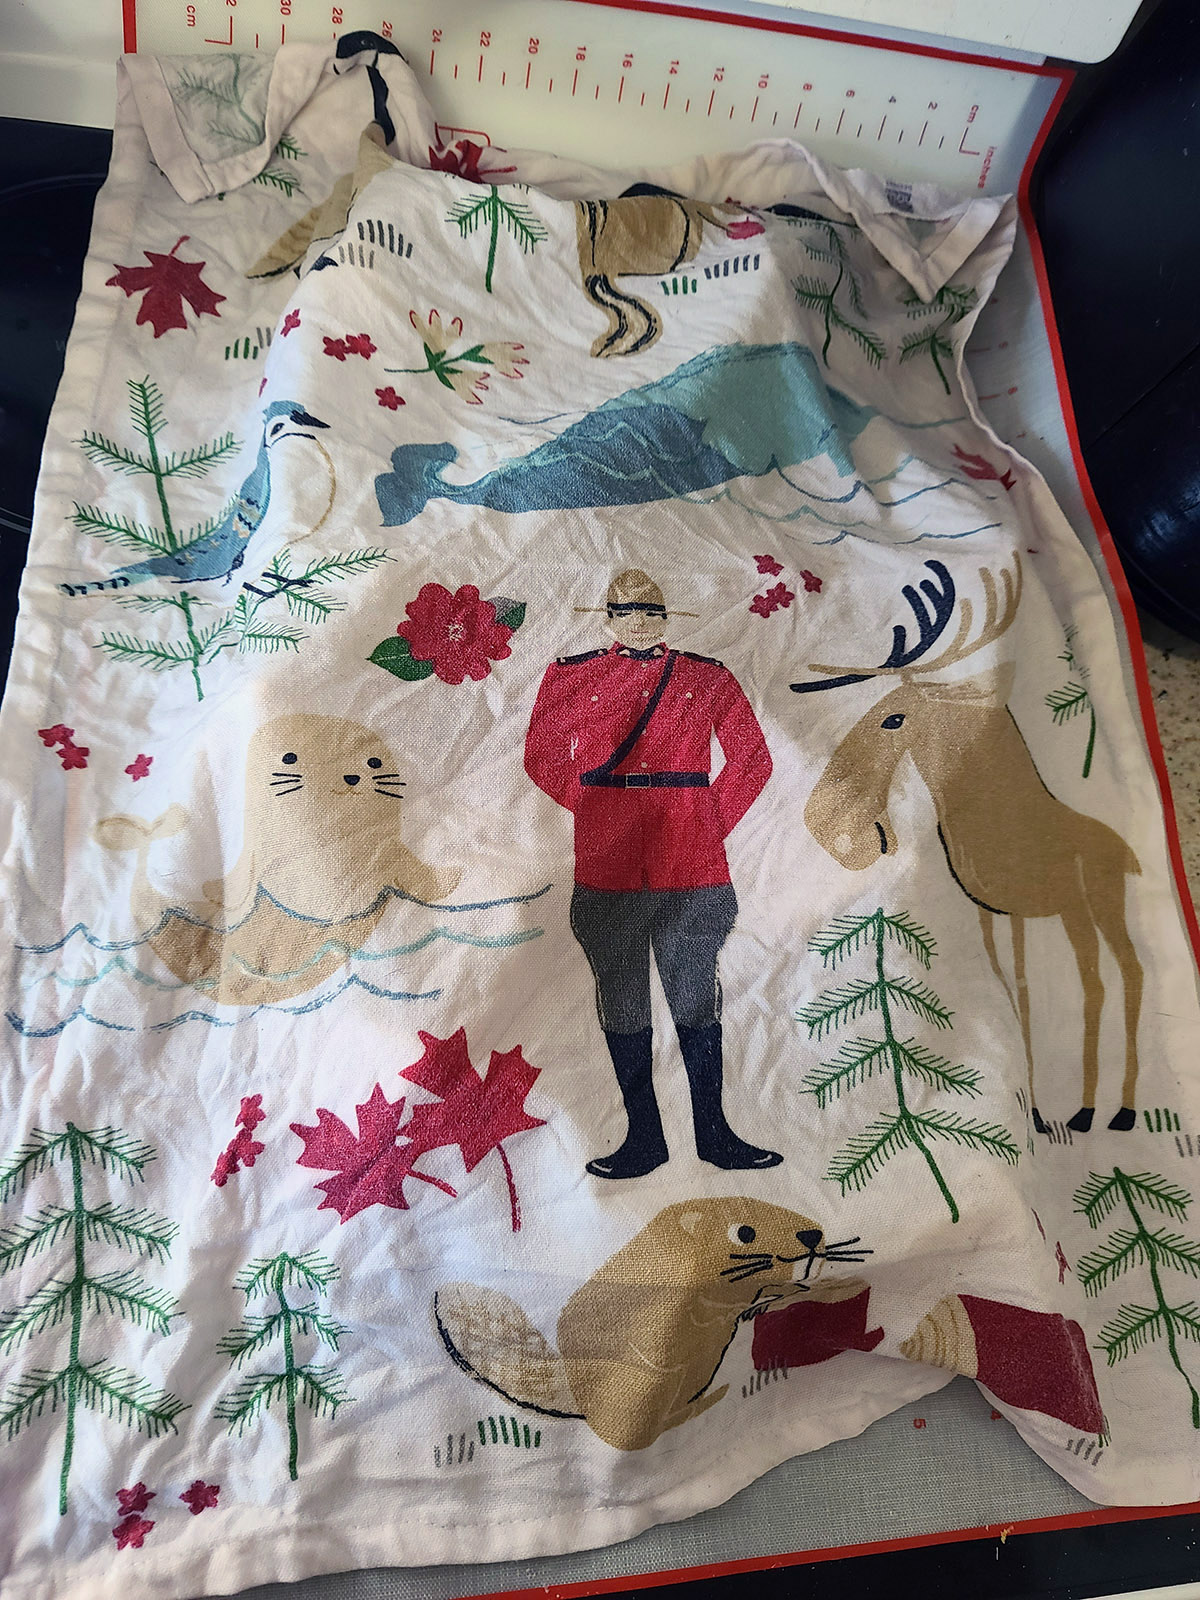 A damp cloth with Canadian imagery draped over the resting dumplings.